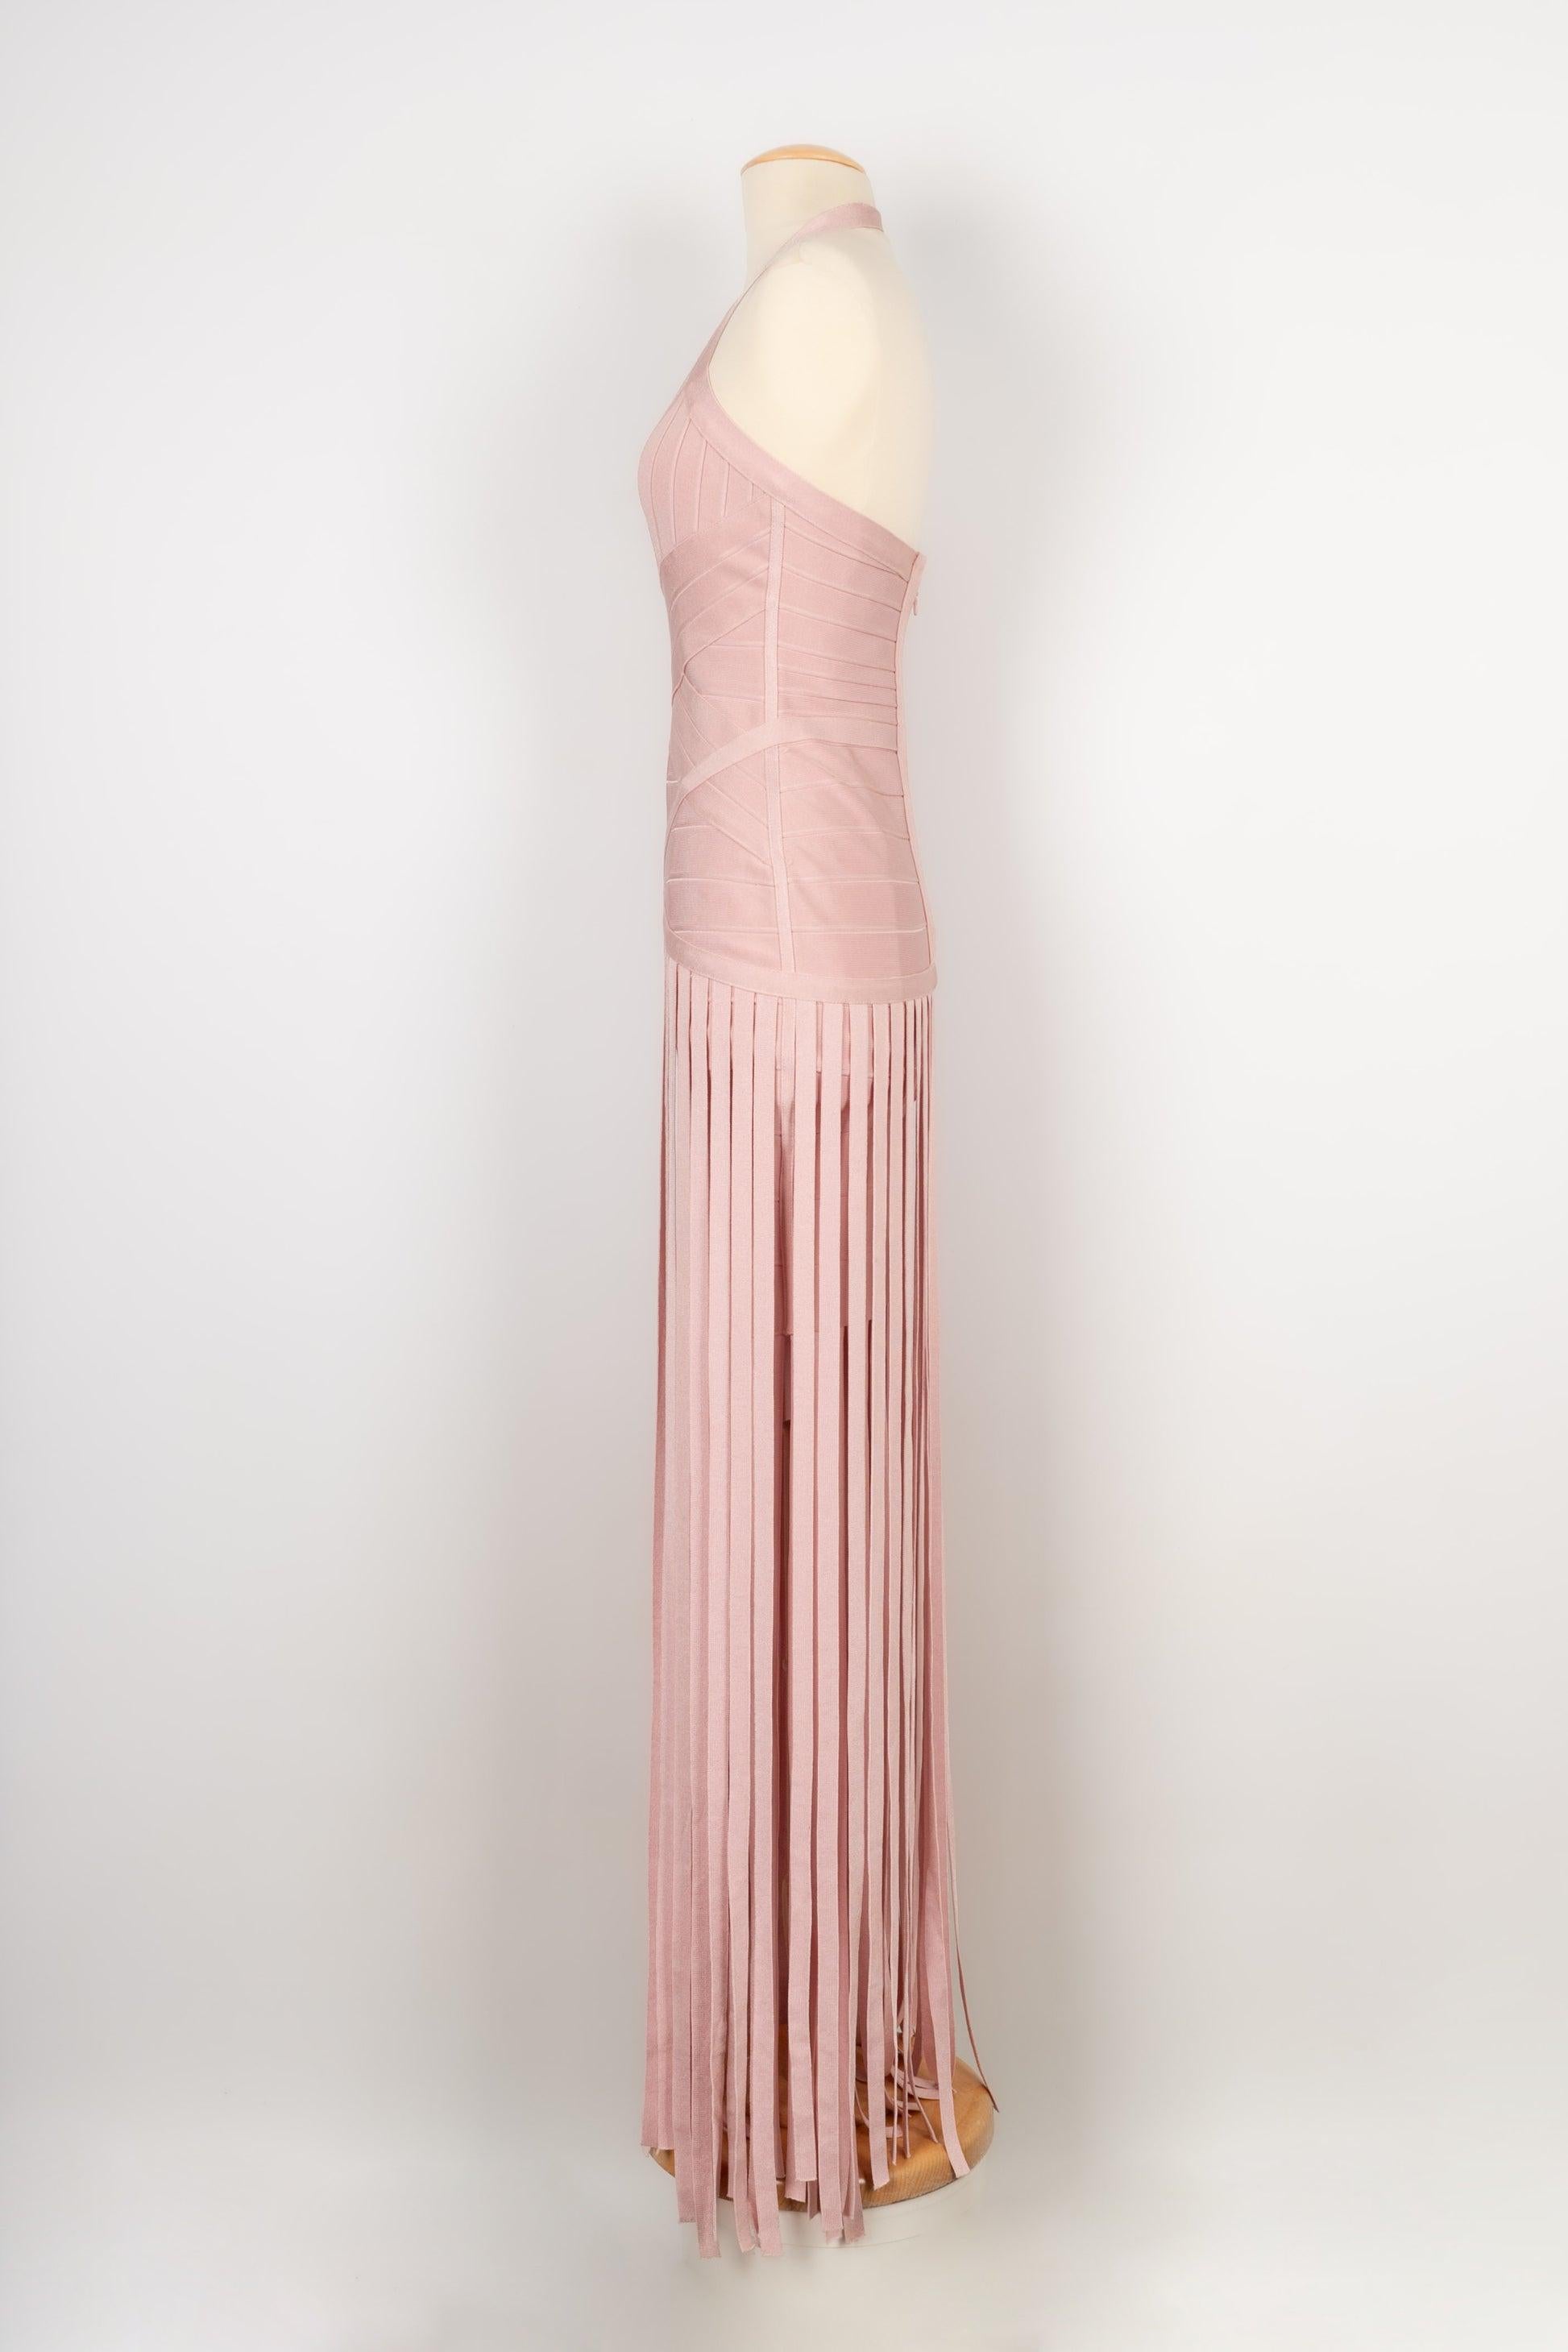 Hervé Léger - Elasticated powder pink dress. Indicated size M.

Additional information:
Condition: Very good condition
Dimensions: Chest: 45 cm - Waist: 32 cm - Hips: 45 cm - Length: 155 cm

Seller Reference: VR264
